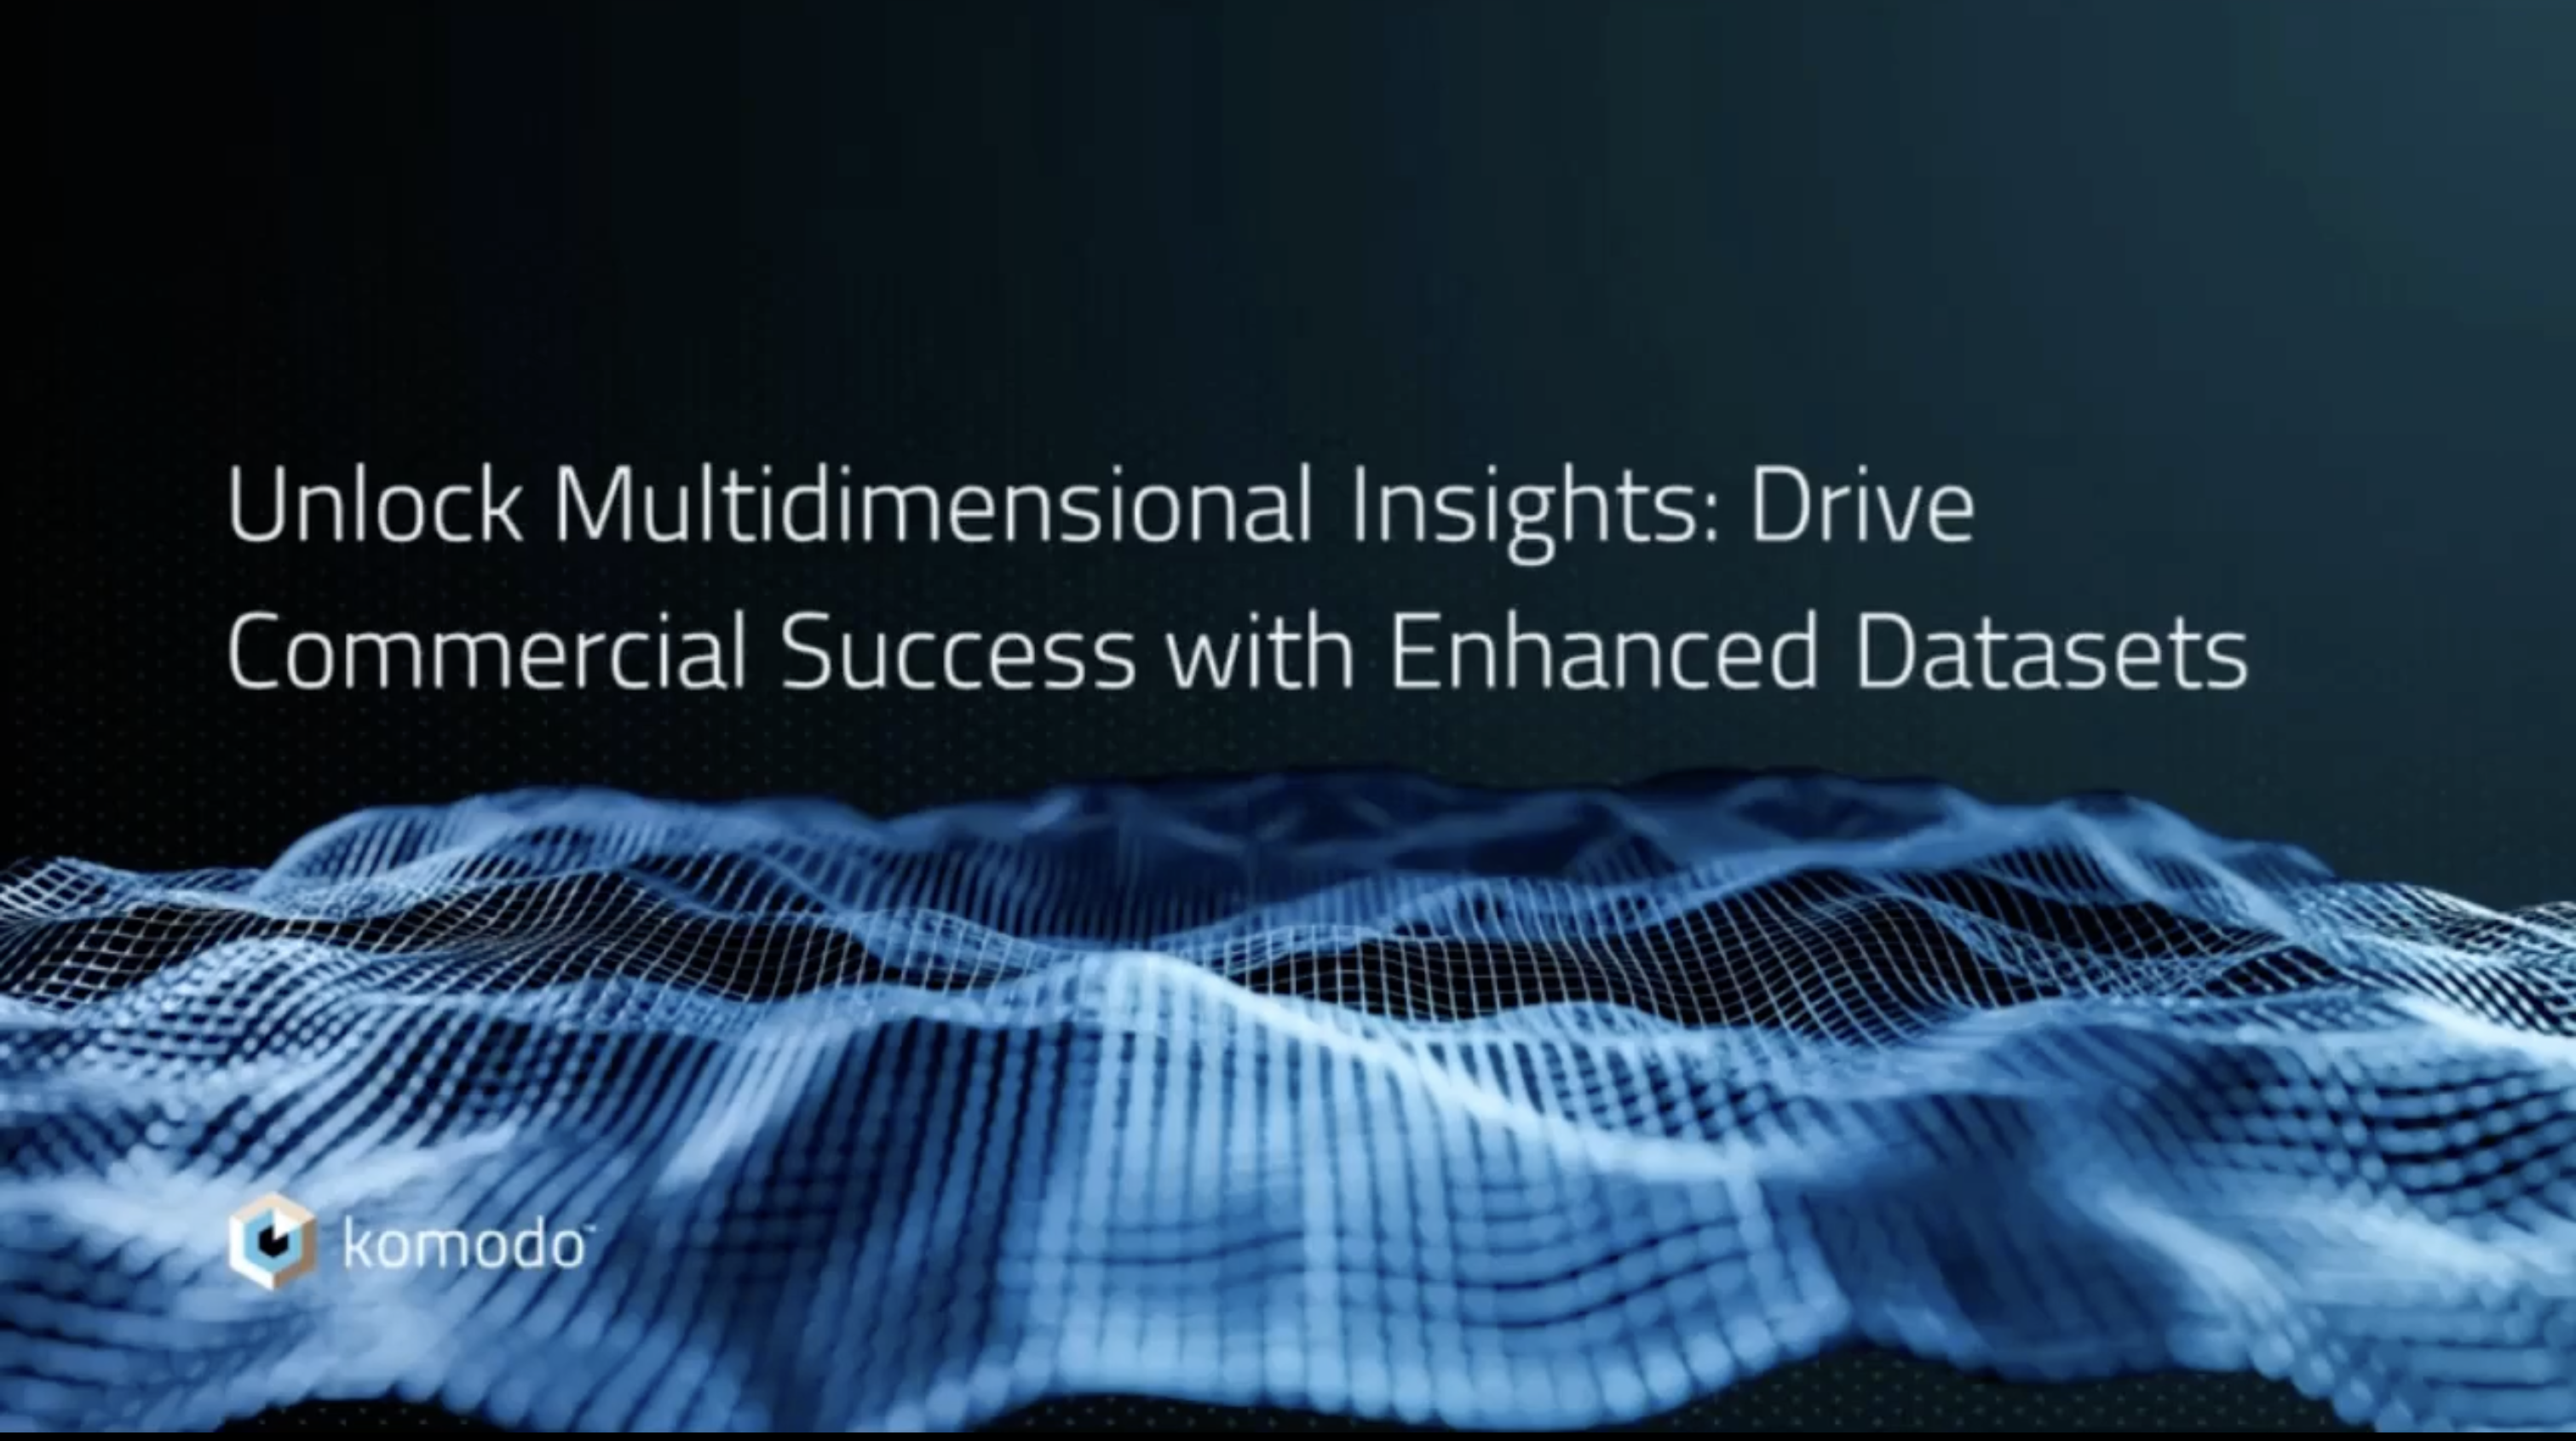 Unlocking Multidimensional Insights Drive Commercial Success with Enhanced Datasets